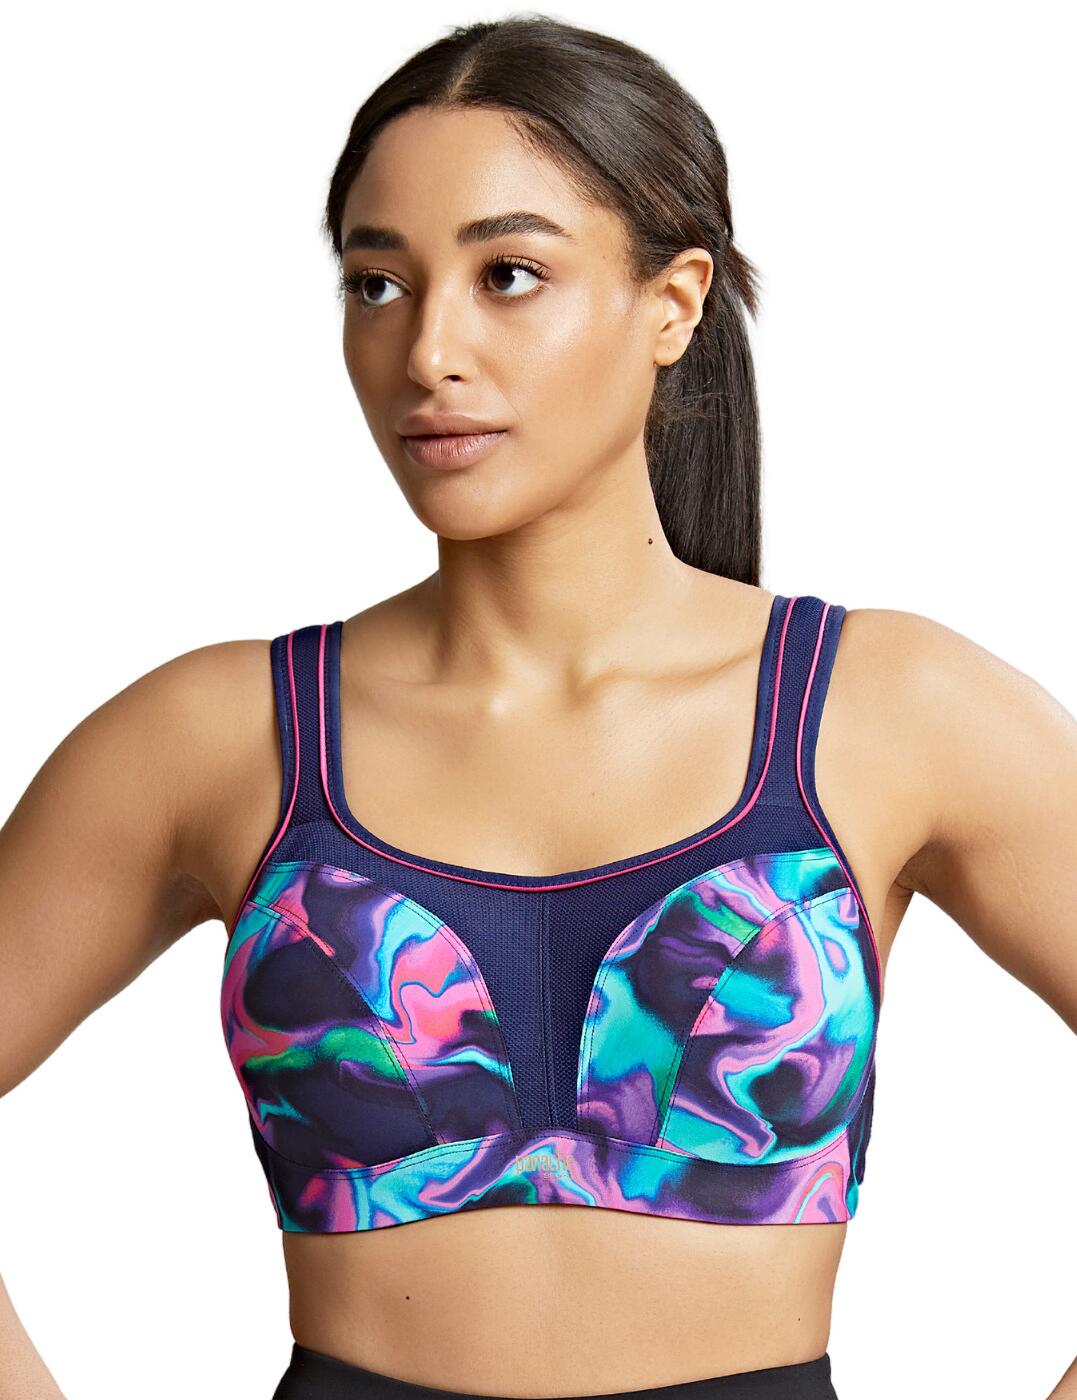 Panache Sports Bra 5021A Underwired High Impact Supportive Sports